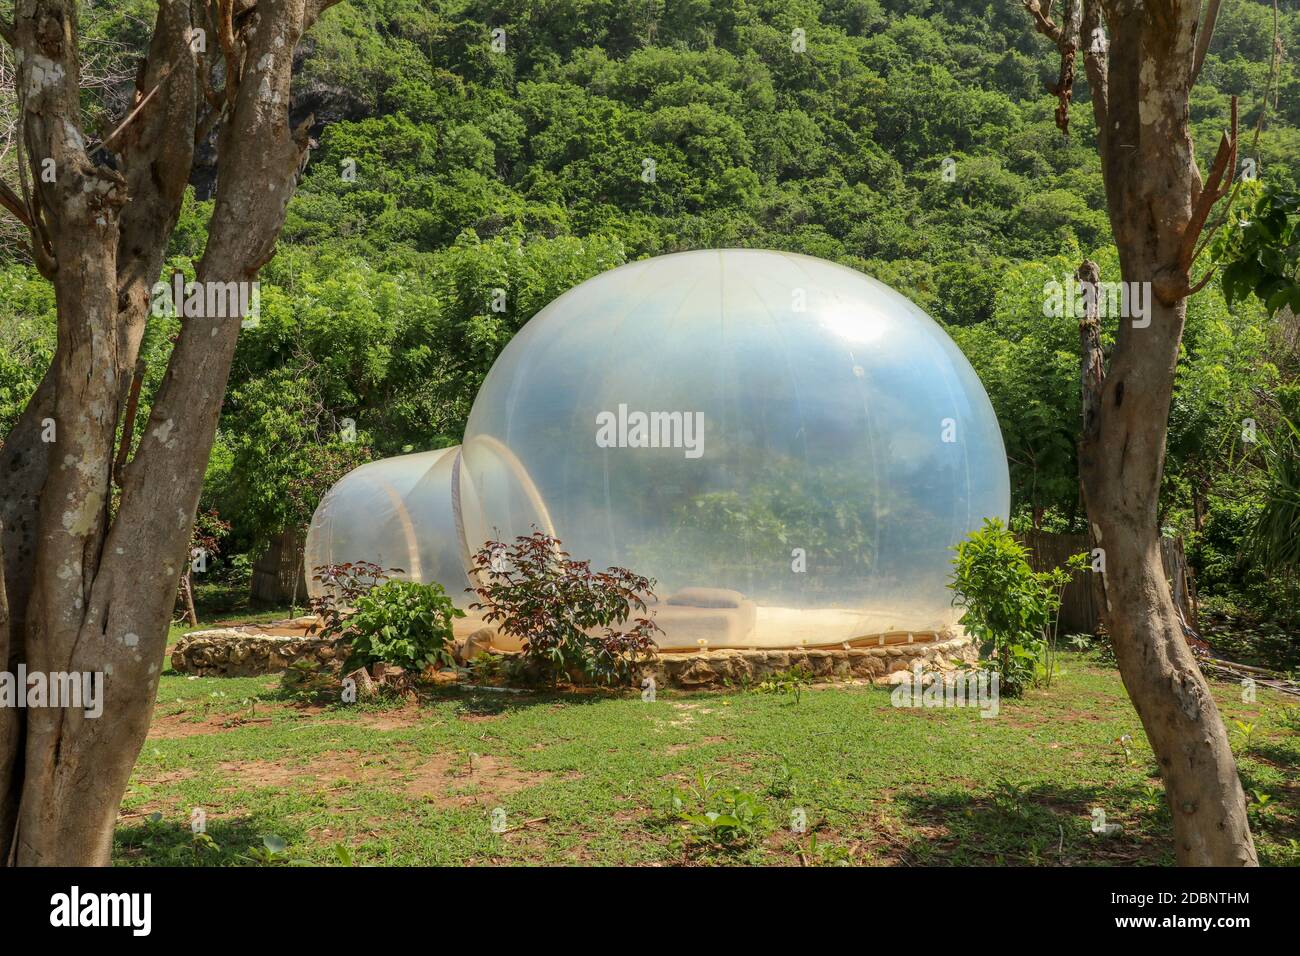 Romantic bubble house with transparent walls. Abstract sci-fi inflatable bubble. Atypical accommodation in exotic tourist destination. Tourist attract Stock Photo